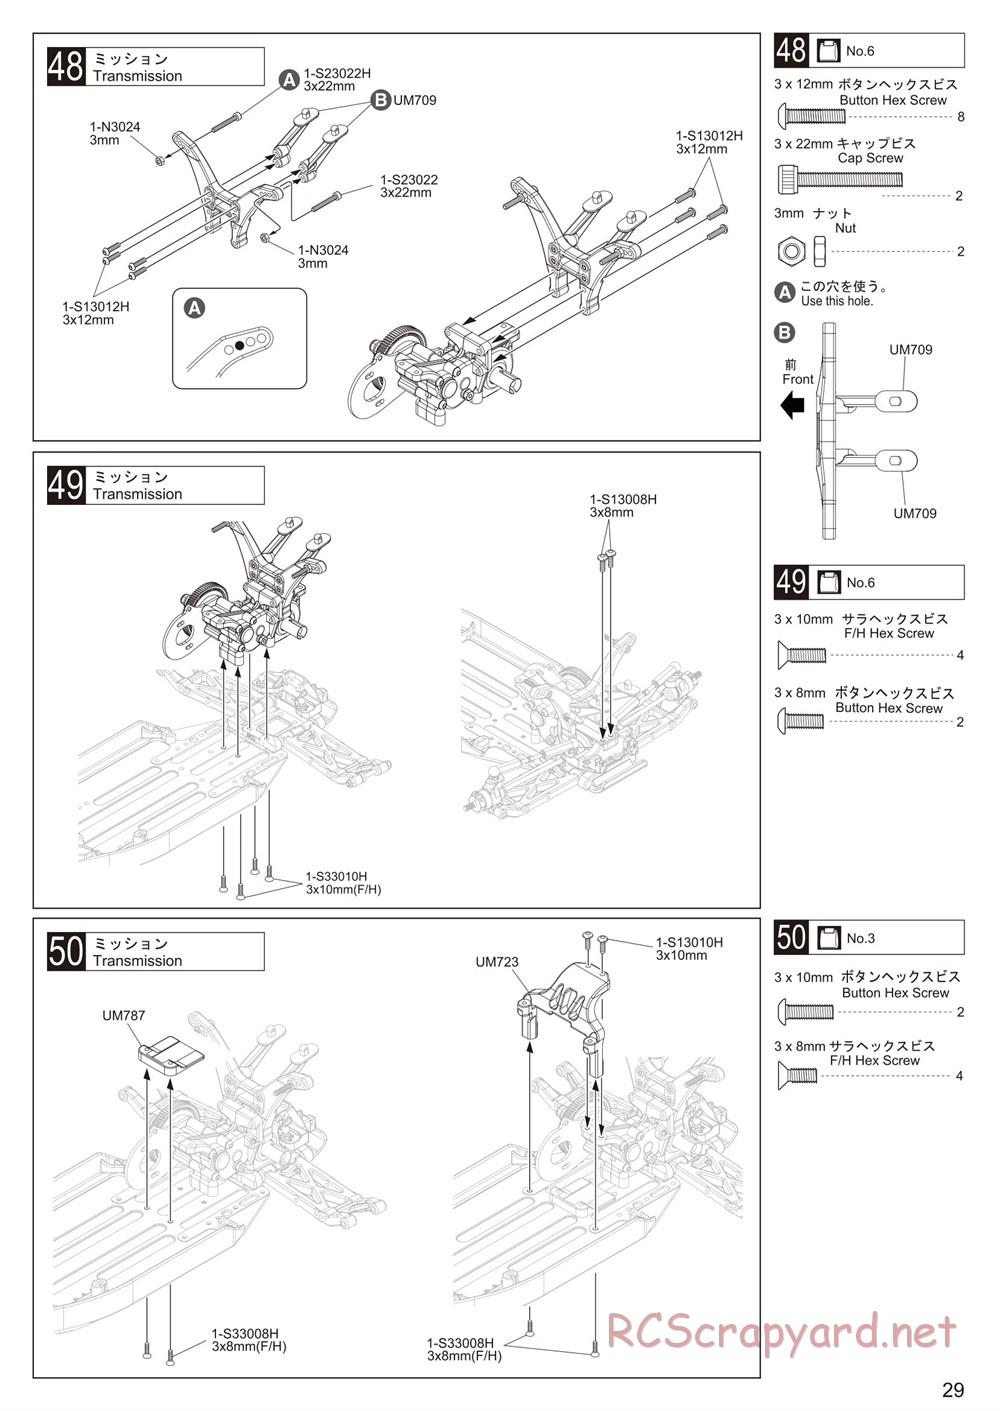 Kyosho - Ultima RB6.6 - Manual - Page 29